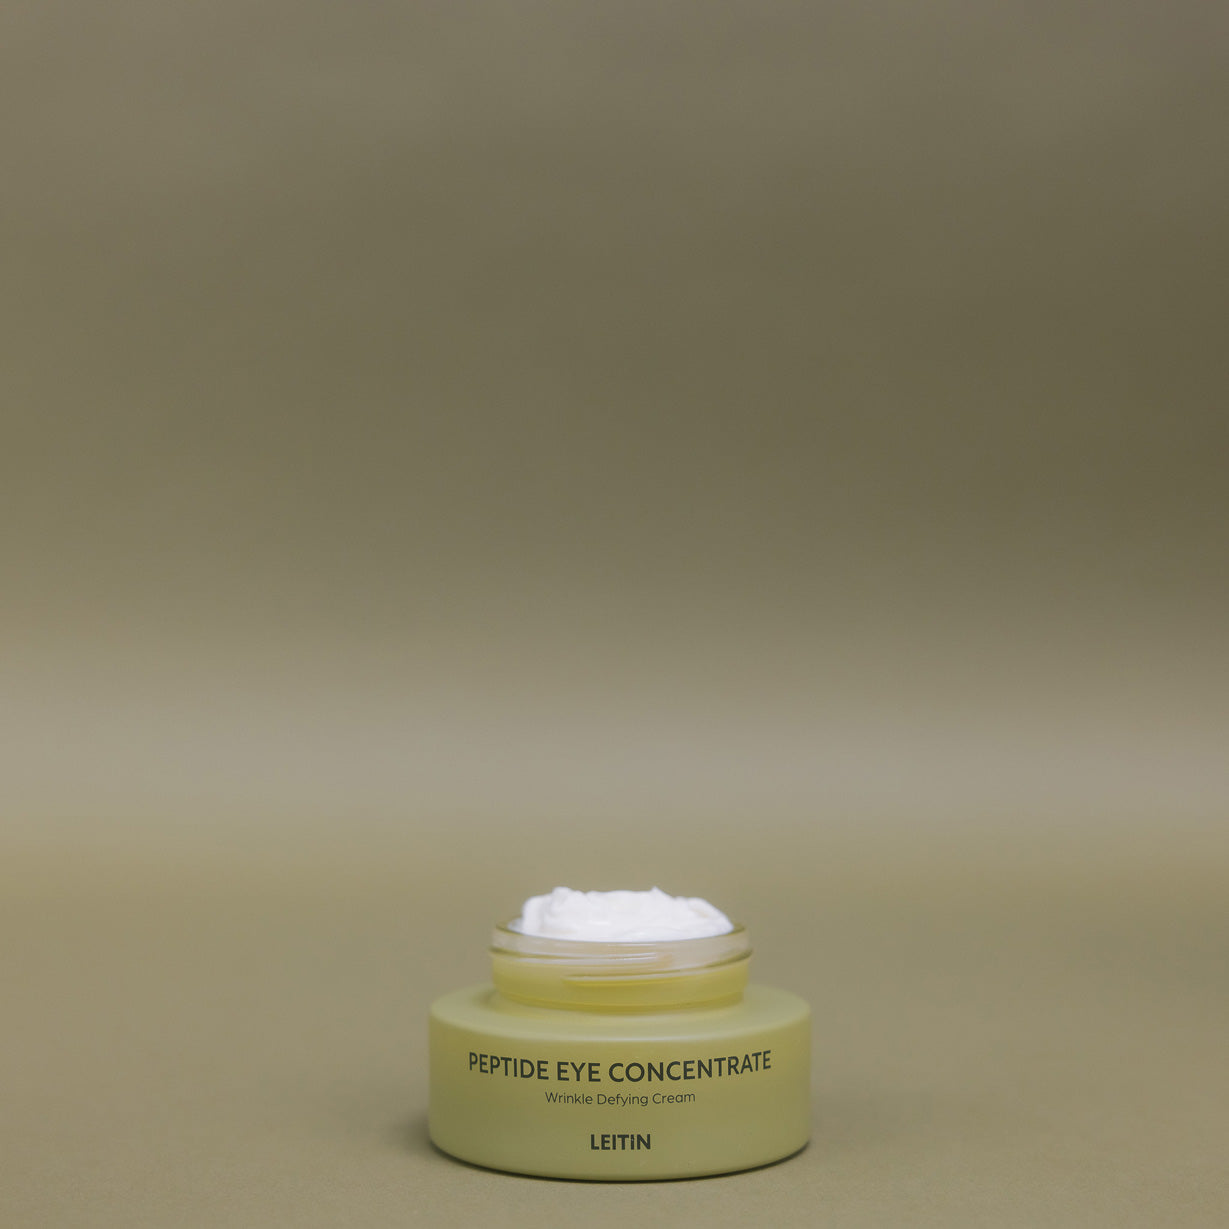 Image of LEITIN Skincare's Peptide Eye Concentrate Lid of Cream Showing